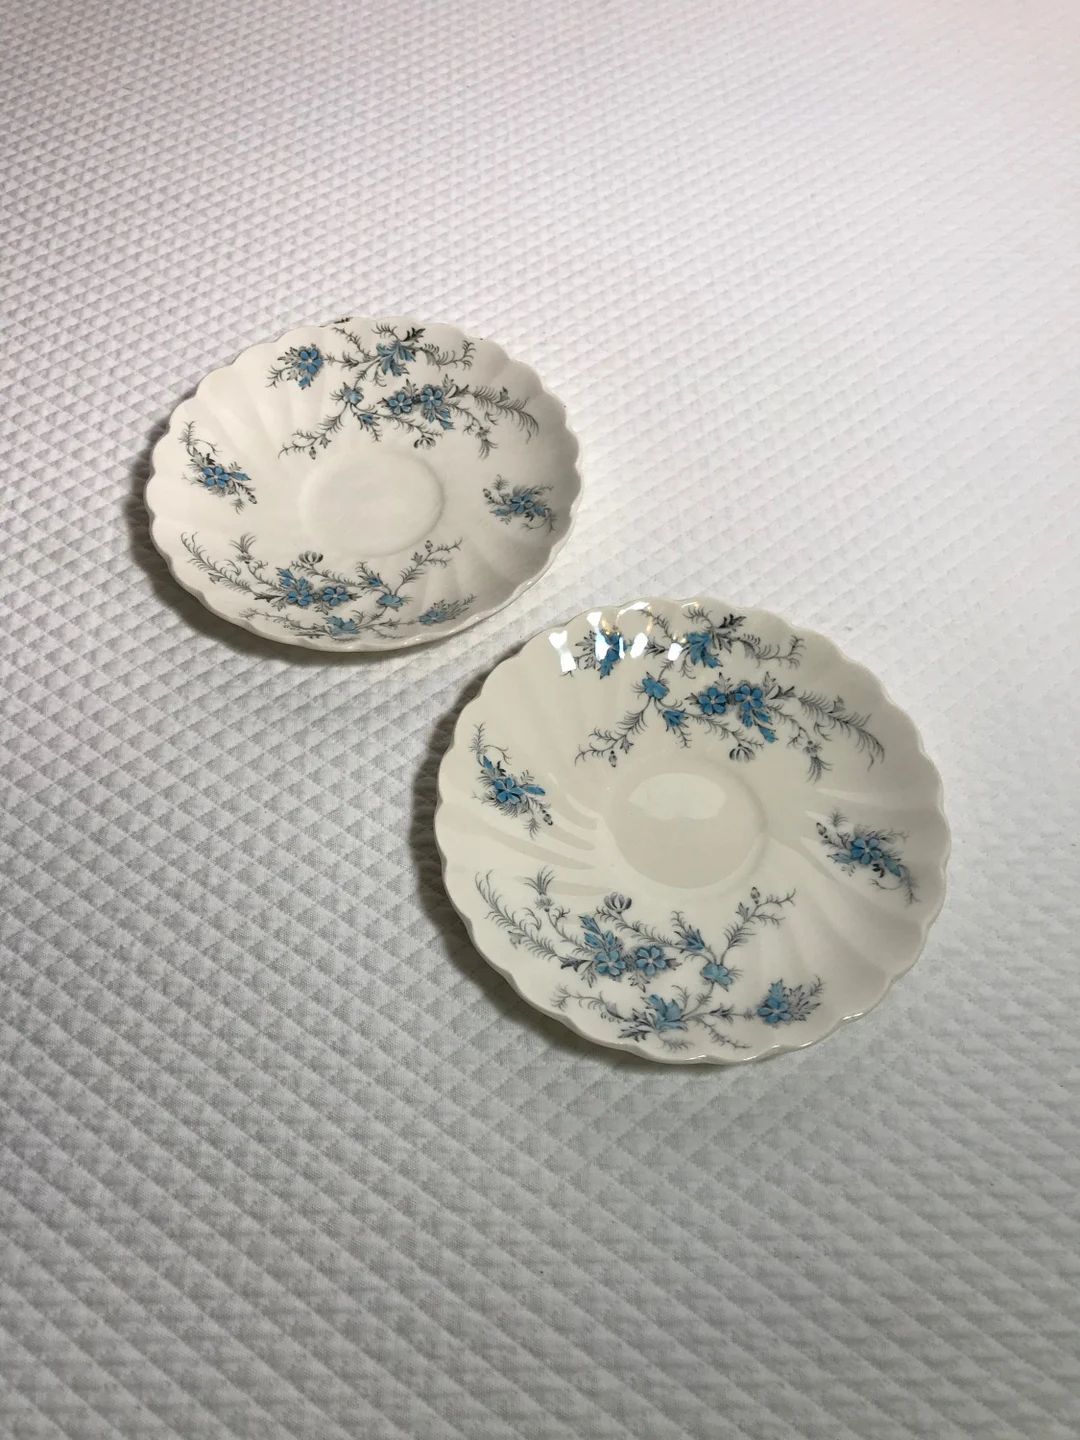 Set of 2 Myott "Forget Me Not" Staffordshire Ware 6" saucers | Etsy (US)